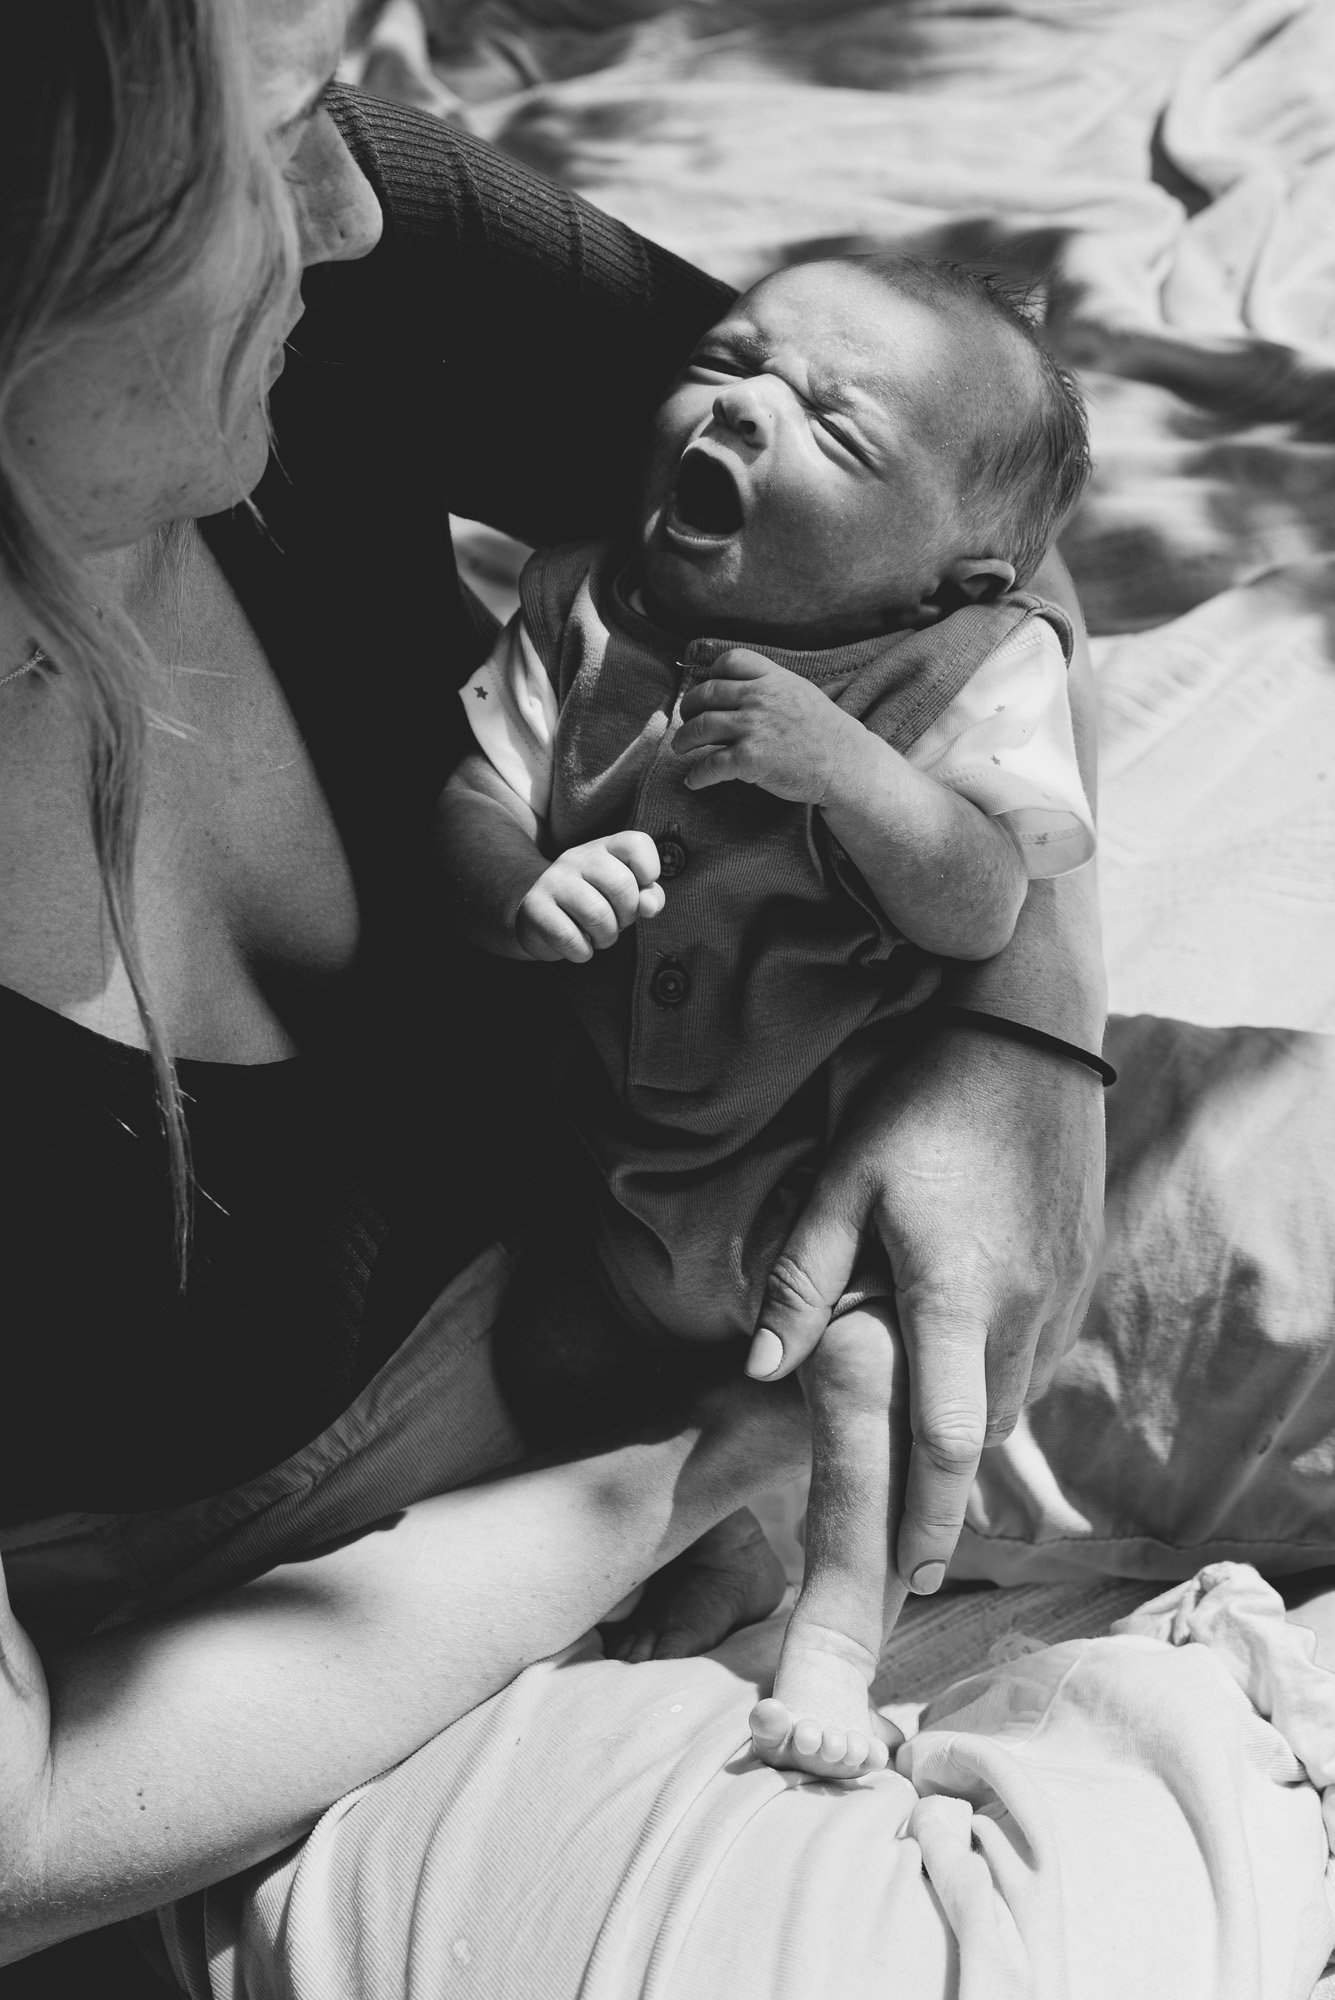 newborn-baby-boy-mum-portrait-nartural-relaxed-at-home-baby-photography.jpg